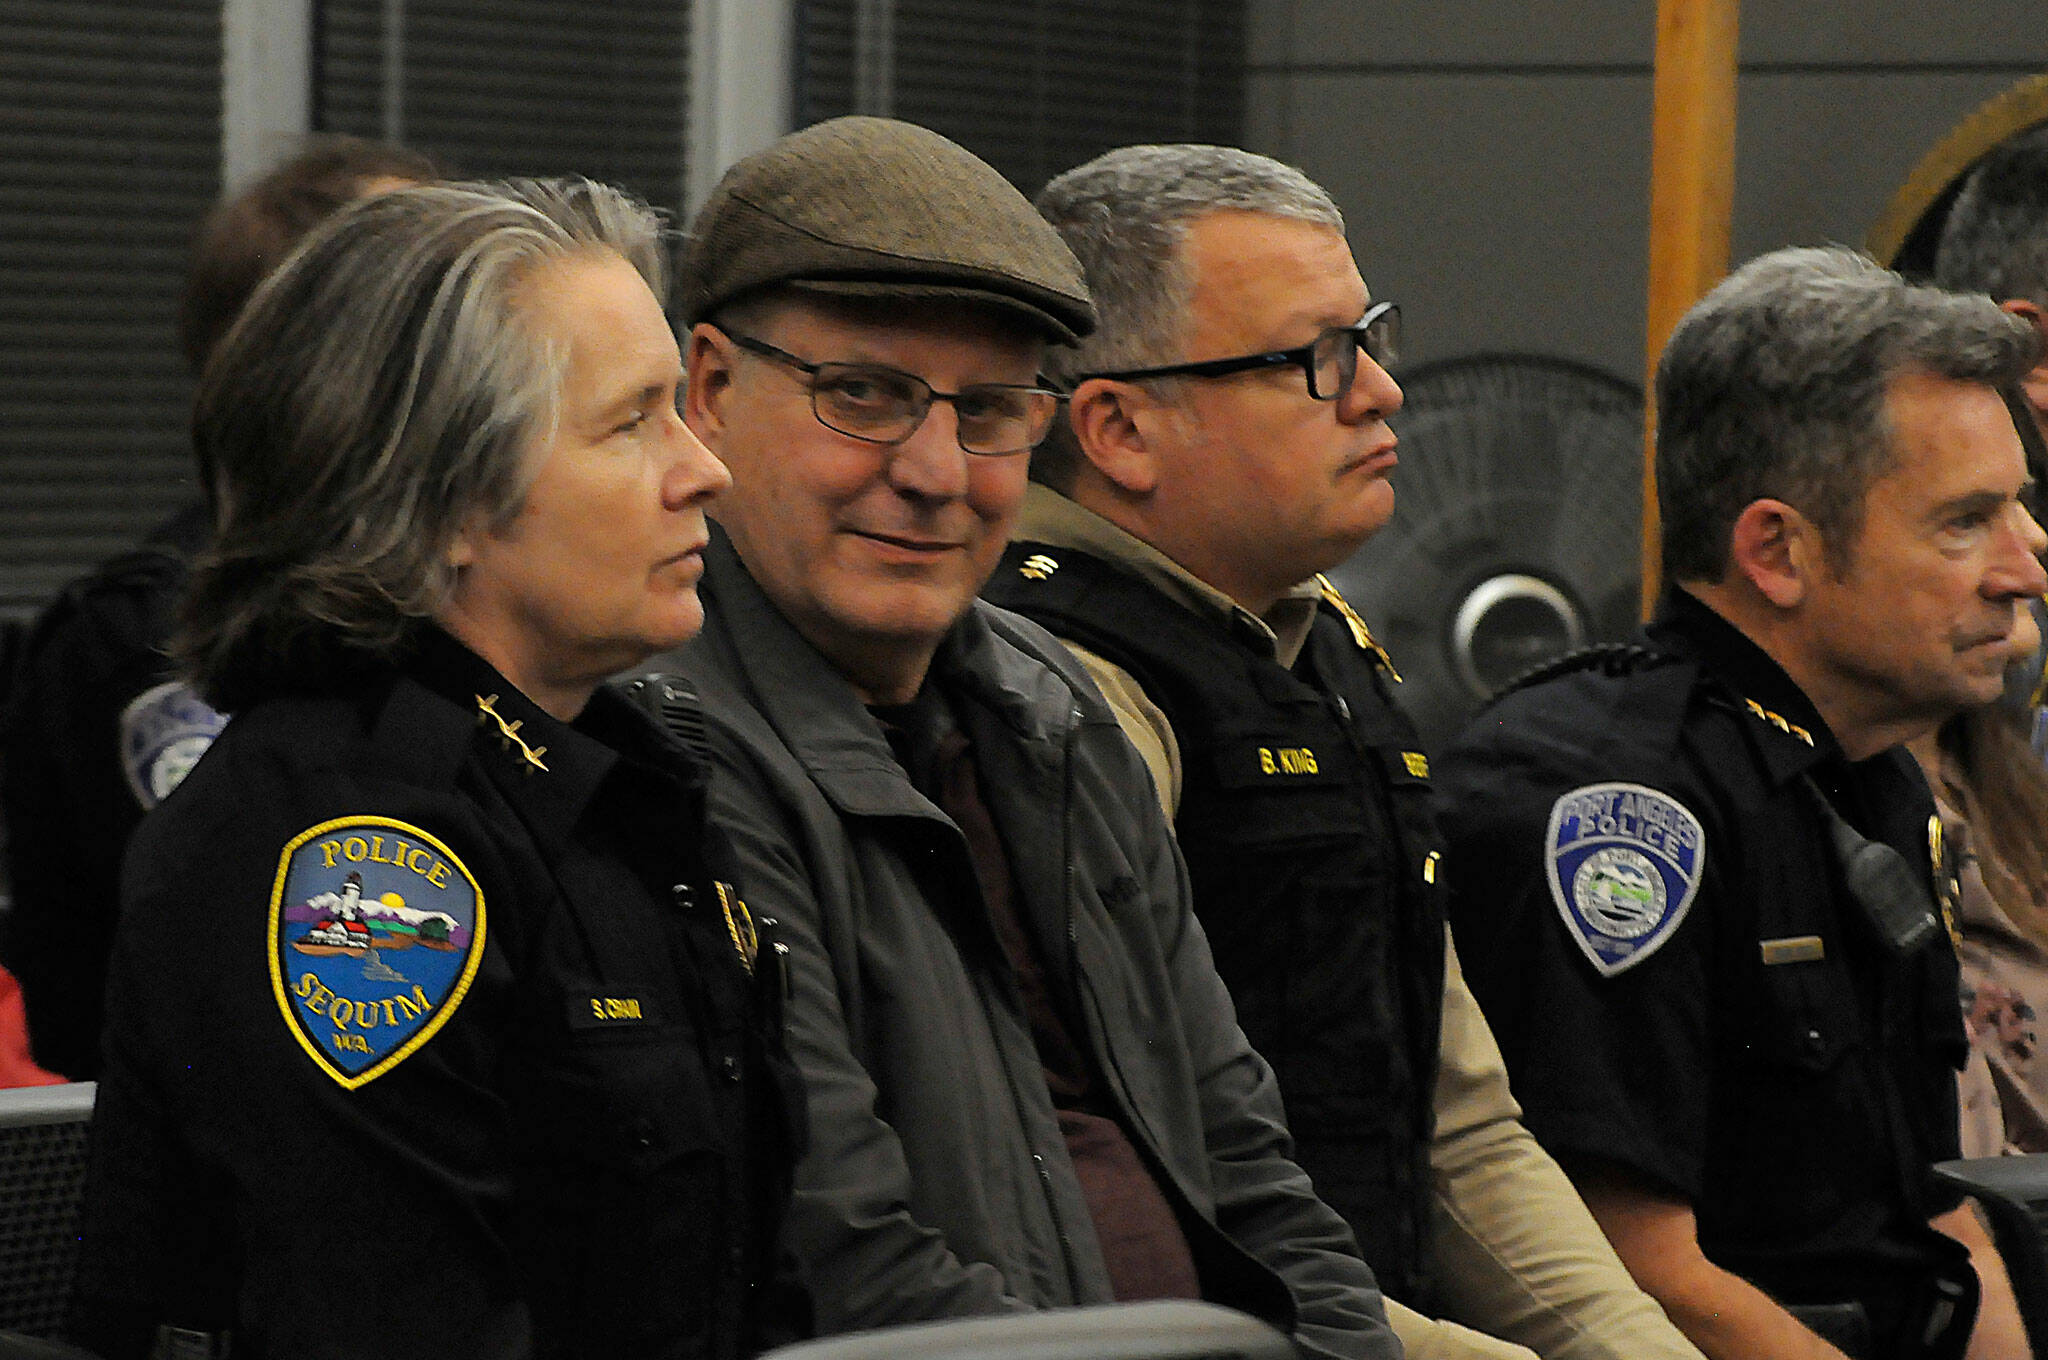 Matthew Nash/ Olympic Peninsula News Group
Sequim Police Chief Sheri Crain listens to a proclamation at the Feb. 26 Sequim city council meeting as her husband Pat smiles with pride in her during the ceremony. Next to Pat is Clallam County Sheriff Brian King and, to his right, Port Angeles Police Chief Brian Smith.